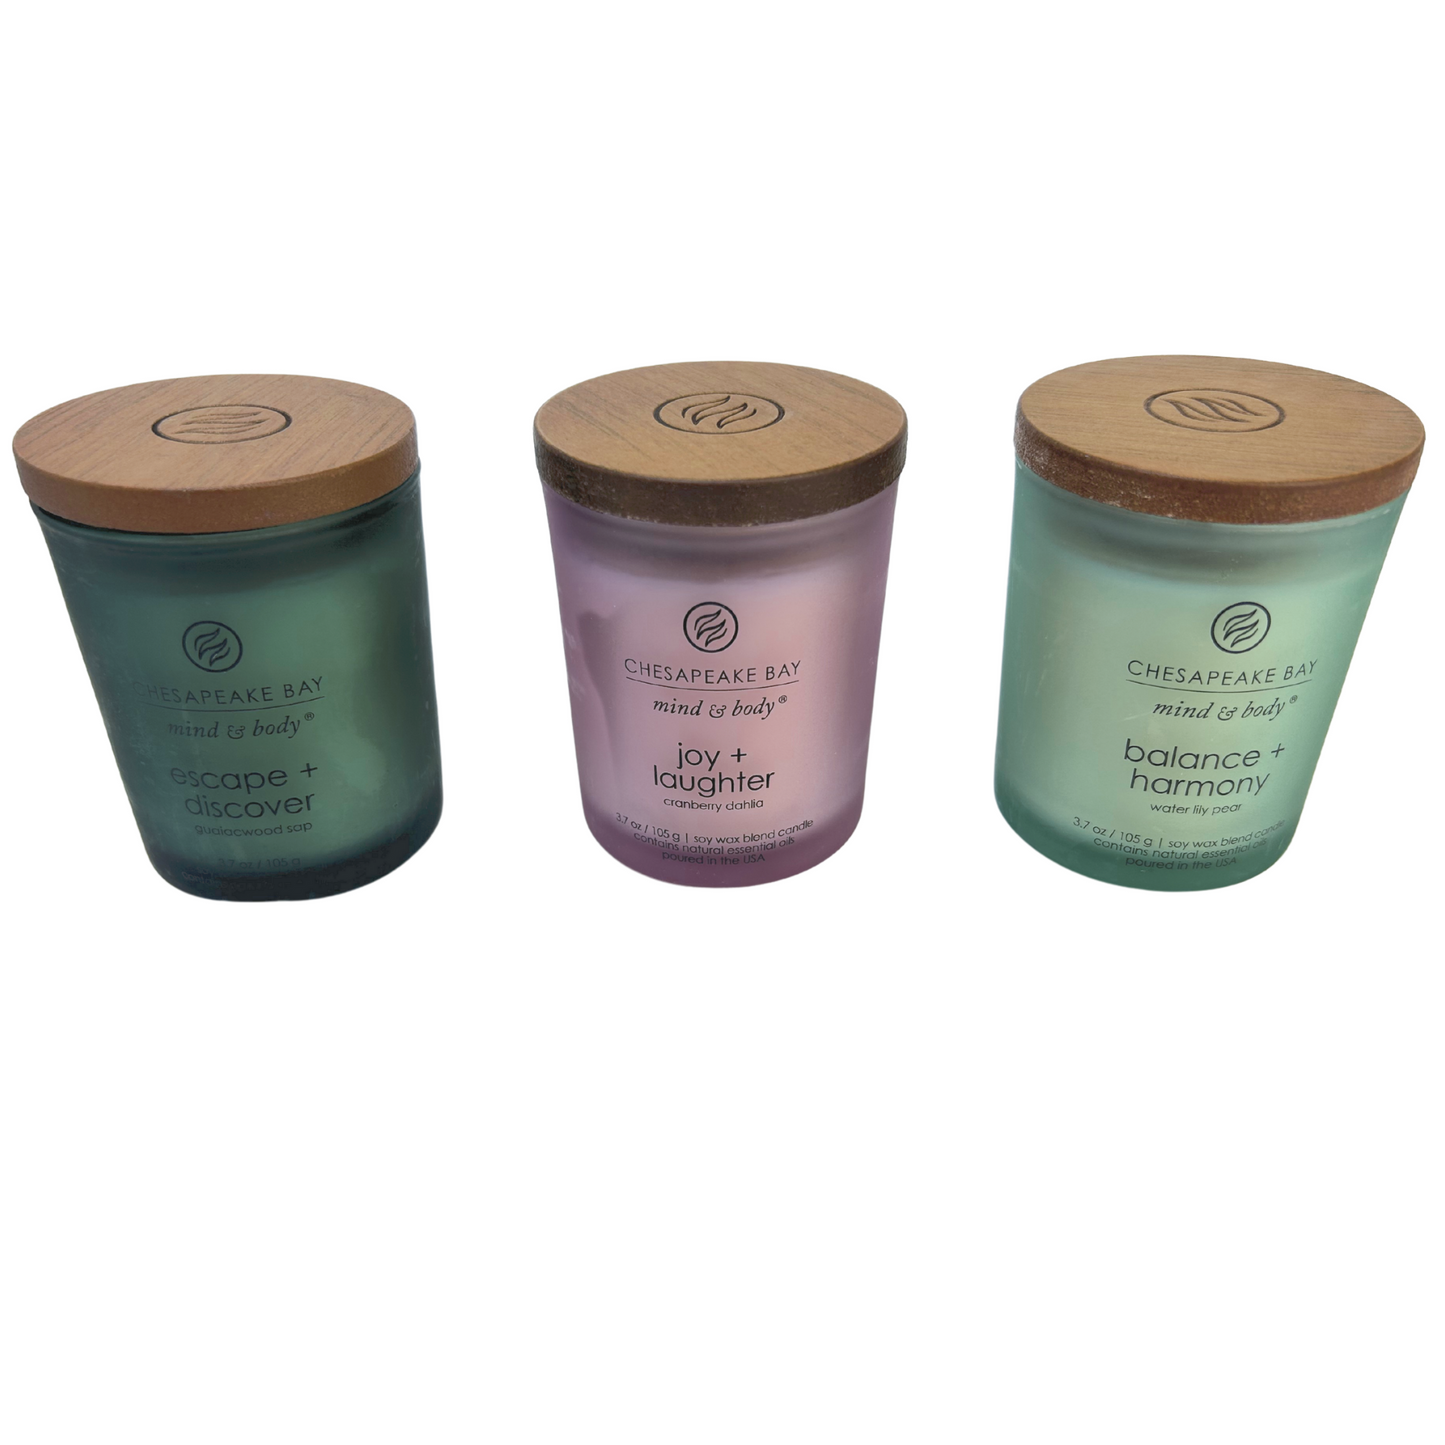 Chesapeake Bay Candle Joy + Laughter, Balance + Harmony, Escape + Discover Scented Candle Gift Set, Small Jar